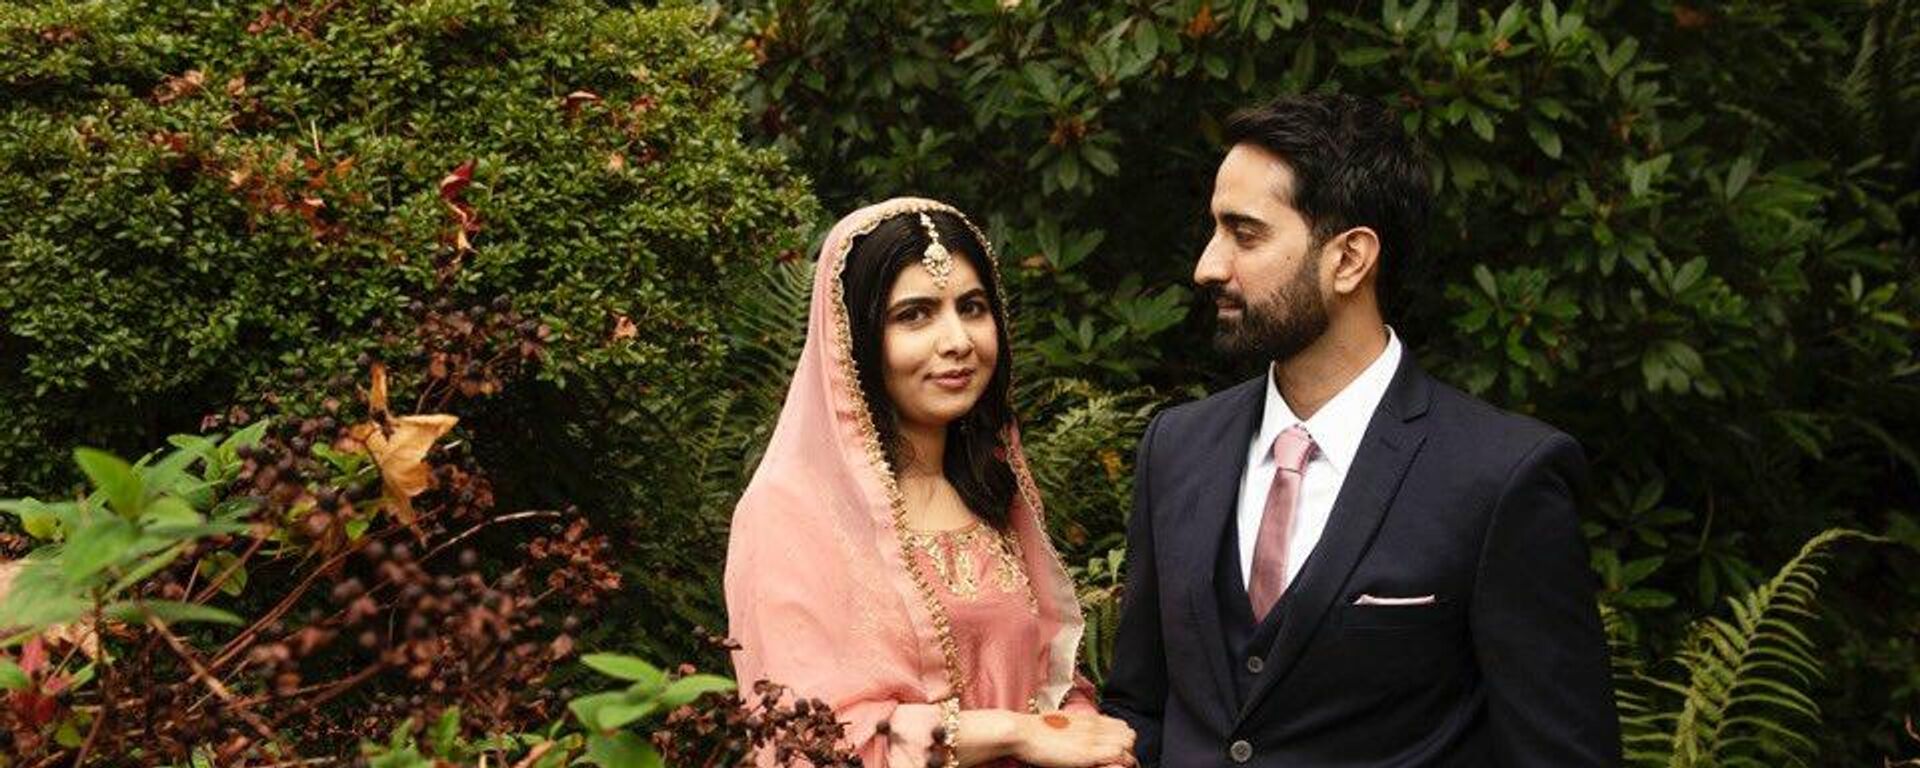 Malala Yousafzai, the youngest Nobel Peace Prize winner in history and prominent girls' education champion, married her partner, Asser Malik. - Sputnik International, 1920, 09.11.2021